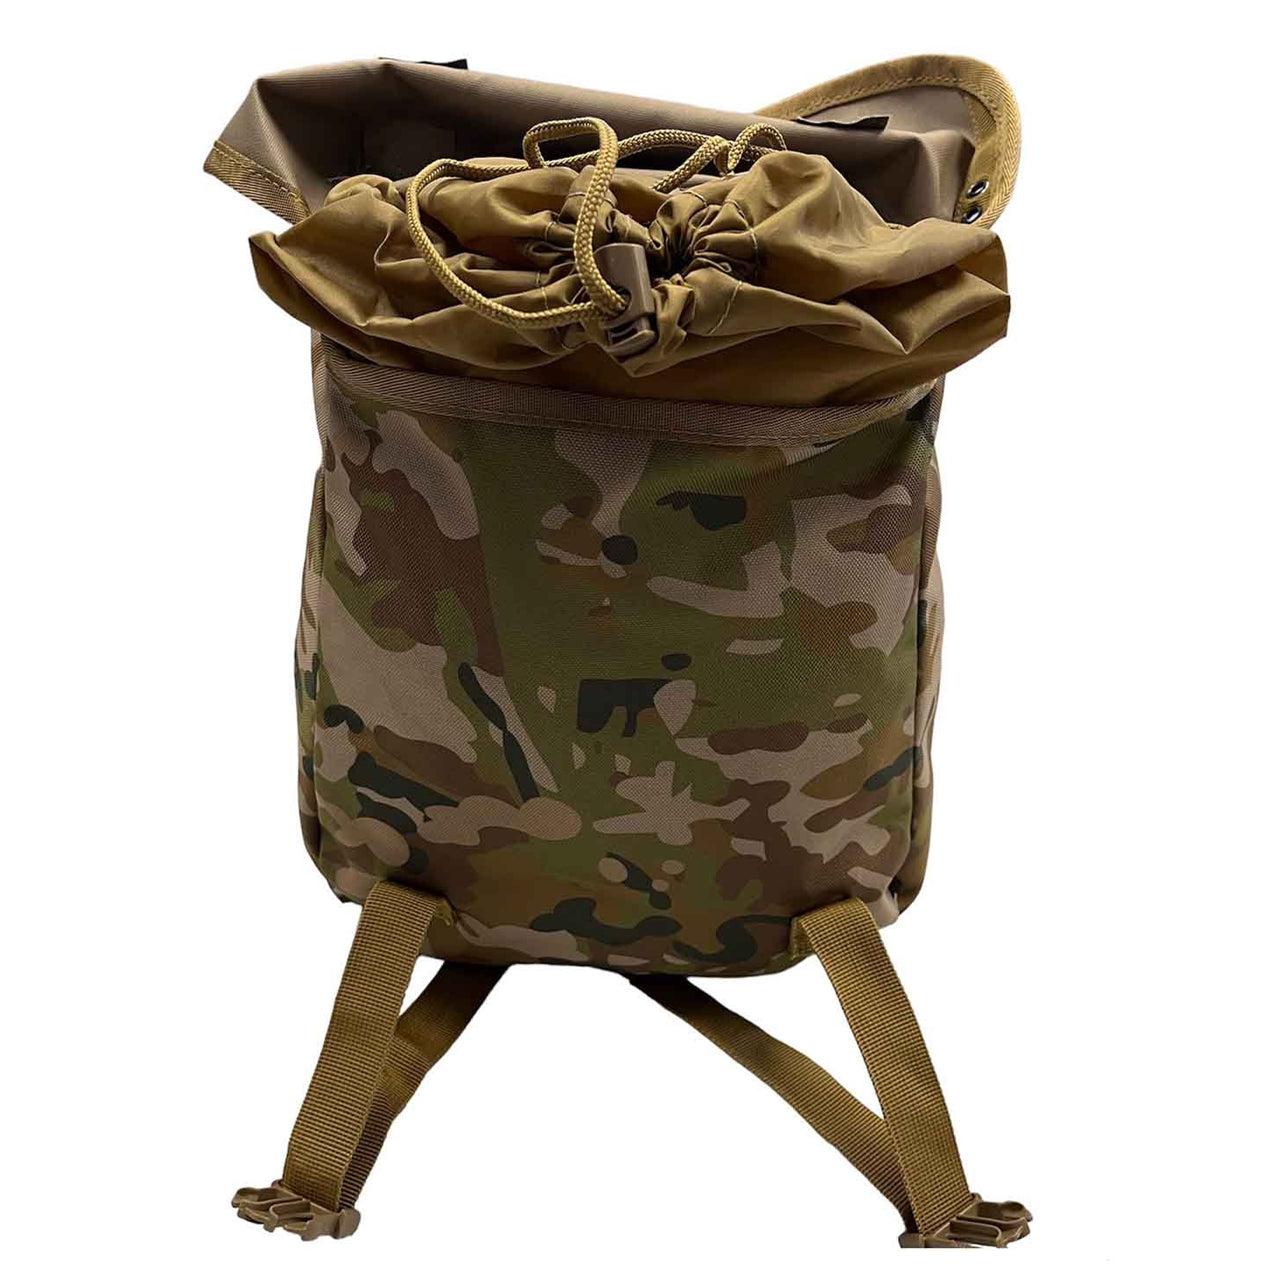 Australian Multicam MOLLE campatible Top loading pouch Internal gusset with drawcord Heavy duty webbing 900D Heavy duty fabric Nylon buckles 7LT capacity www.defenceqstore.com.au